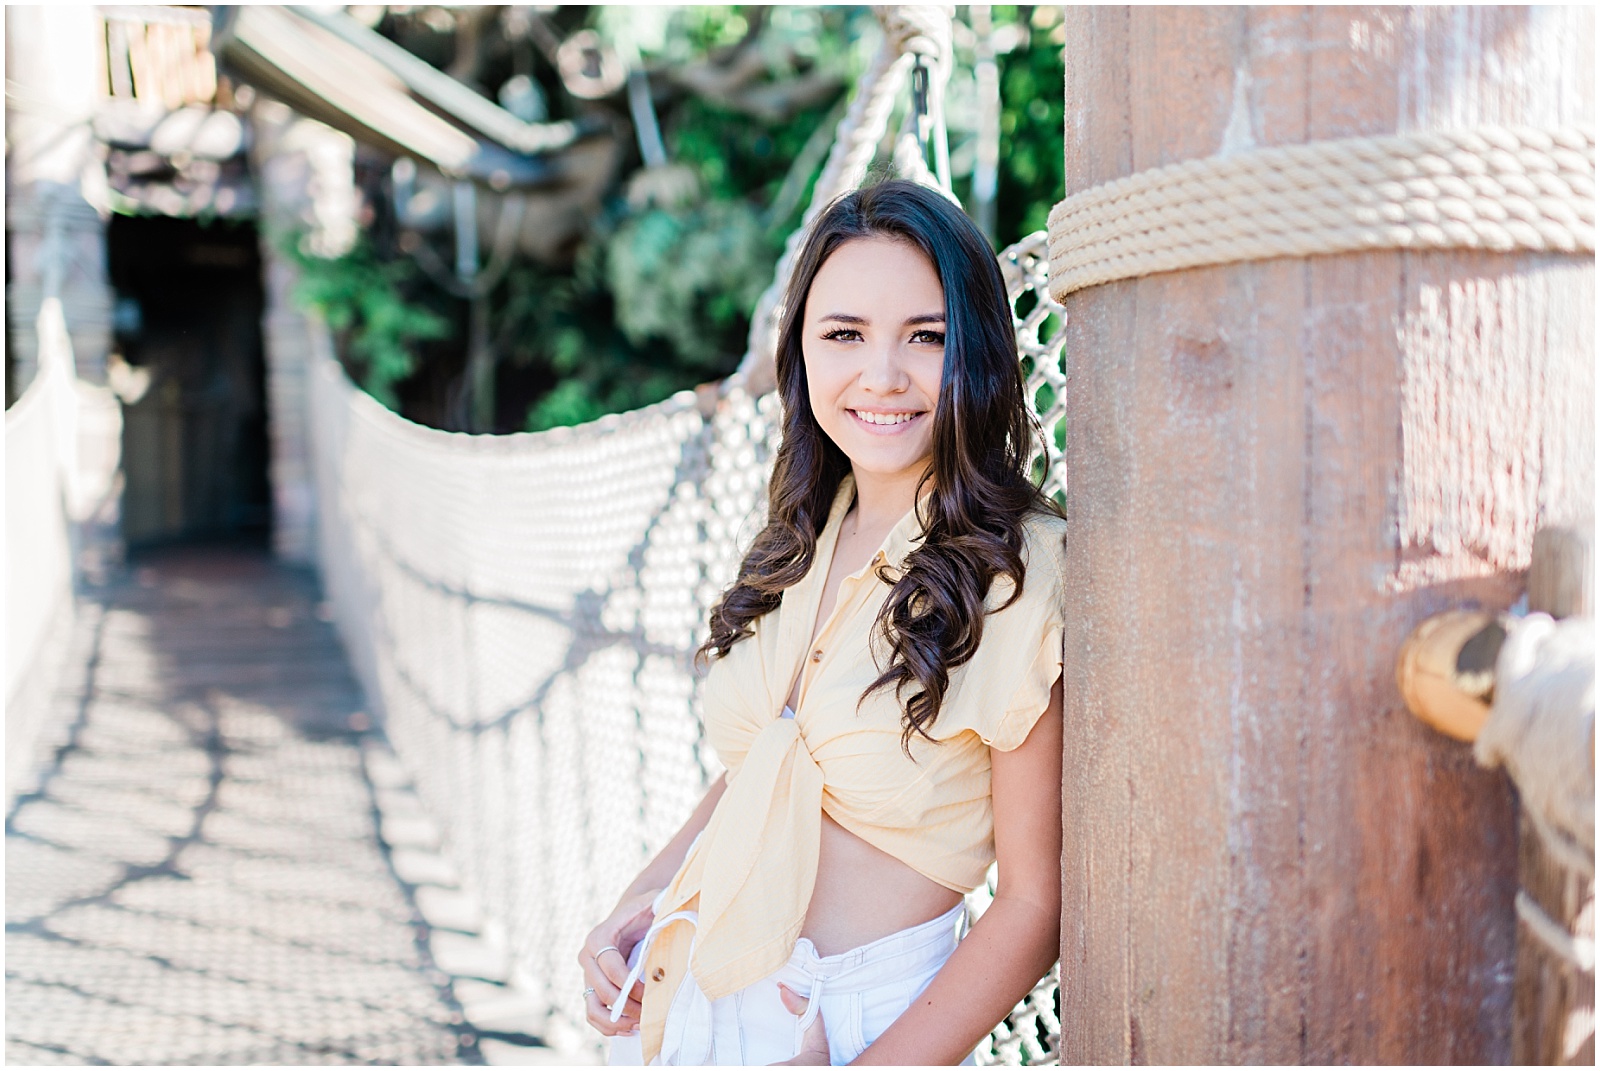 Disneyland Tarzan's Treehouse Senior Session. Images by Mollie Jane Photography. To see more go to www.molliejanephotography.com.